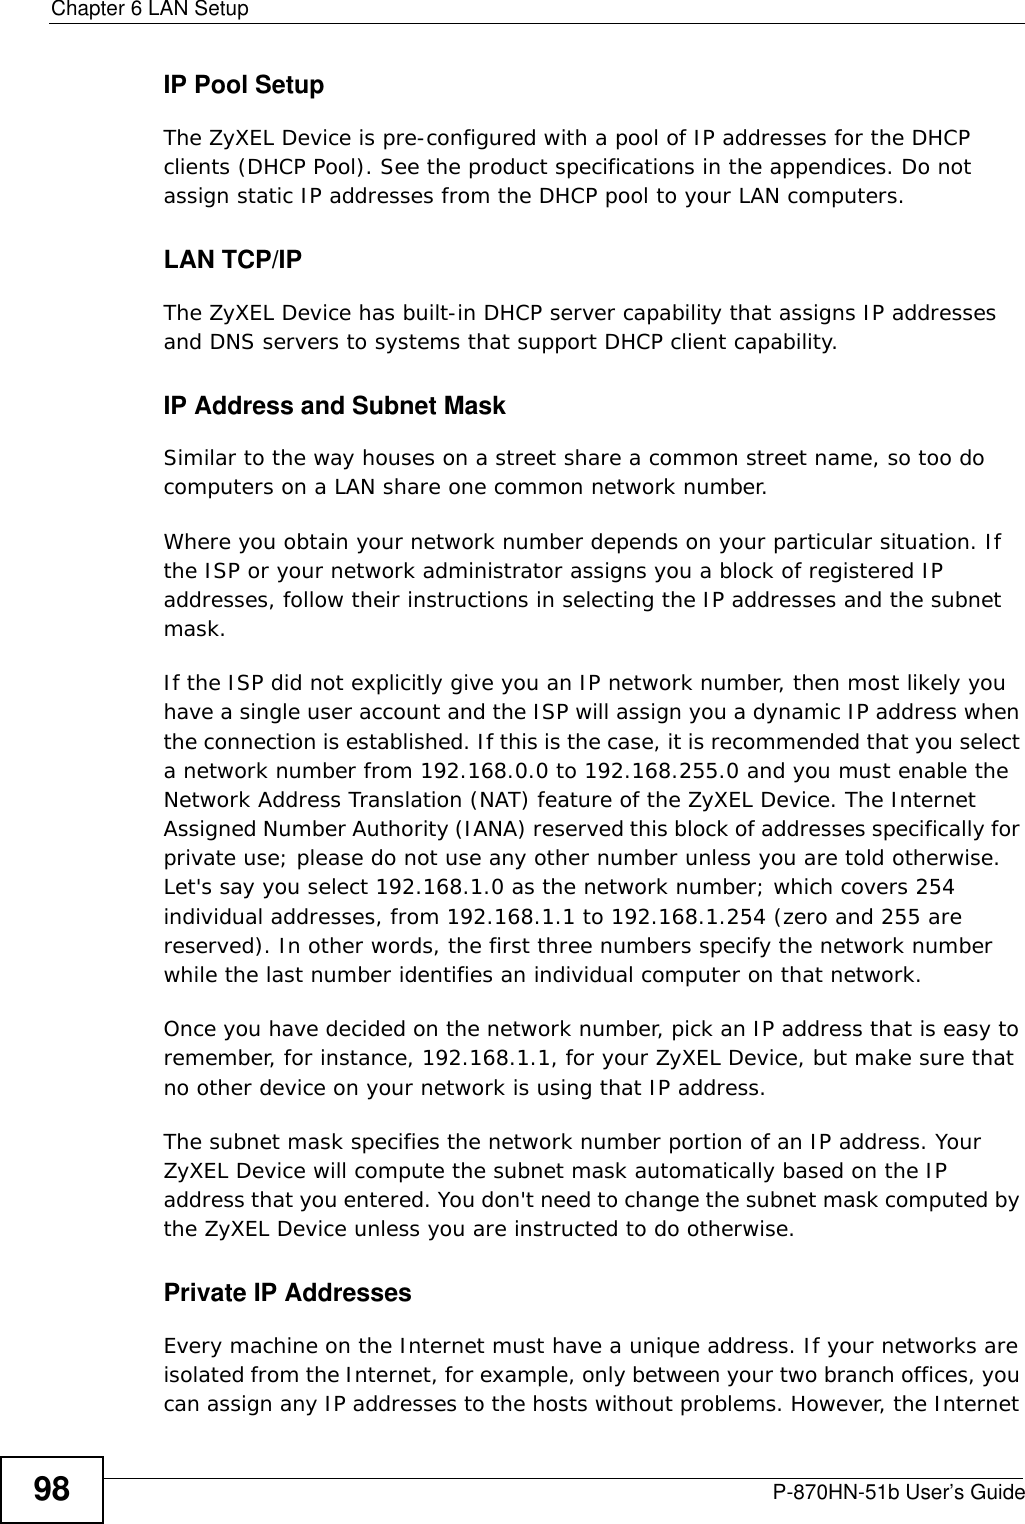 Chapter 6 LAN SetupP-870HN-51b User’s Guide98IP Pool SetupThe ZyXEL Device is pre-configured with a pool of IP addresses for the DHCP clients (DHCP Pool). See the product specifications in the appendices. Do not assign static IP addresses from the DHCP pool to your LAN computers.LAN TCP/IP The ZyXEL Device has built-in DHCP server capability that assigns IP addresses and DNS servers to systems that support DHCP client capability.IP Address and Subnet MaskSimilar to the way houses on a street share a common street name, so too do computers on a LAN share one common network number.Where you obtain your network number depends on your particular situation. If the ISP or your network administrator assigns you a block of registered IP addresses, follow their instructions in selecting the IP addresses and the subnet mask.If the ISP did not explicitly give you an IP network number, then most likely you have a single user account and the ISP will assign you a dynamic IP address when the connection is established. If this is the case, it is recommended that you select a network number from 192.168.0.0 to 192.168.255.0 and you must enable the Network Address Translation (NAT) feature of the ZyXEL Device. The Internet Assigned Number Authority (IANA) reserved this block of addresses specifically for private use; please do not use any other number unless you are told otherwise. Let&apos;s say you select 192.168.1.0 as the network number; which covers 254 individual addresses, from 192.168.1.1 to 192.168.1.254 (zero and 255 are reserved). In other words, the first three numbers specify the network number while the last number identifies an individual computer on that network.Once you have decided on the network number, pick an IP address that is easy to remember, for instance, 192.168.1.1, for your ZyXEL Device, but make sure that no other device on your network is using that IP address.The subnet mask specifies the network number portion of an IP address. Your ZyXEL Device will compute the subnet mask automatically based on the IP address that you entered. You don&apos;t need to change the subnet mask computed by the ZyXEL Device unless you are instructed to do otherwise.Private IP AddressesEvery machine on the Internet must have a unique address. If your networks are isolated from the Internet, for example, only between your two branch offices, you can assign any IP addresses to the hosts without problems. However, the Internet 